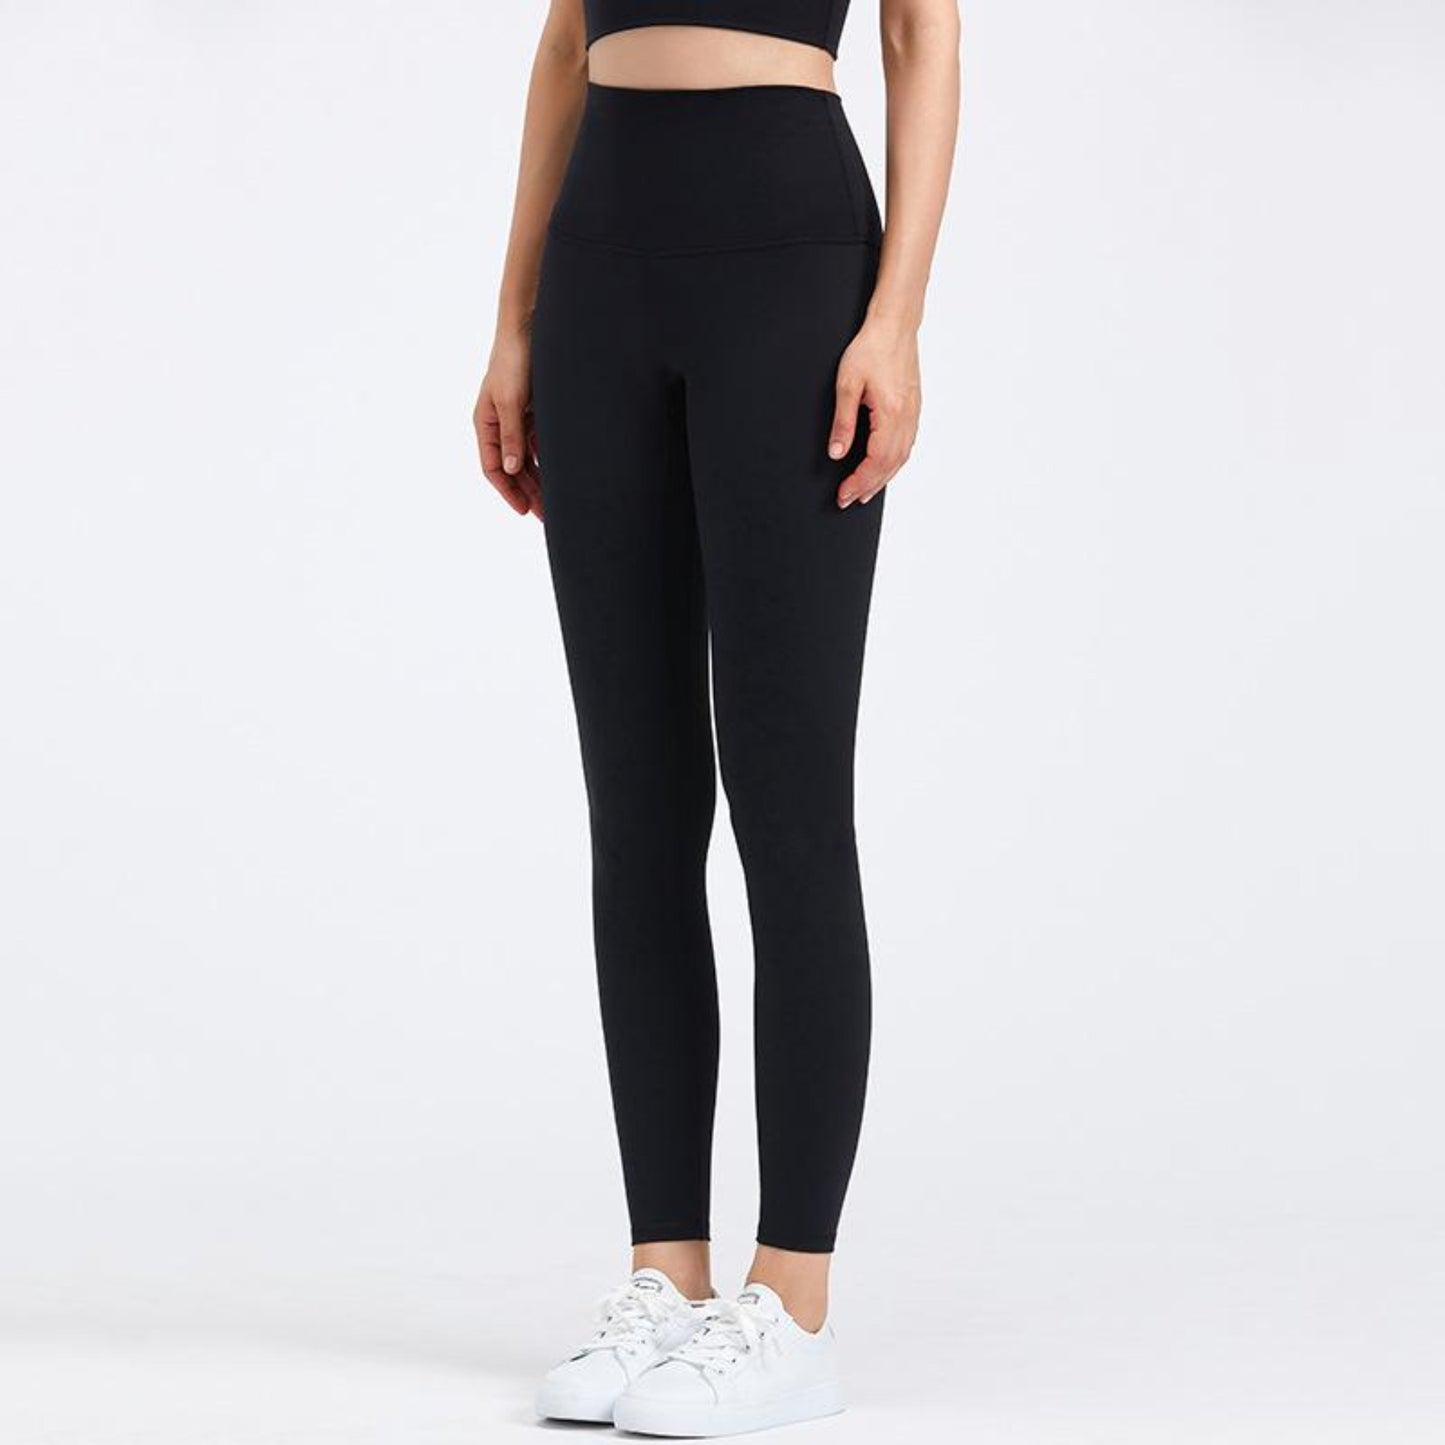 DEEP BLACK, HIGH RISE AND SQUAT PROOF LEGGINGS WORN BY MODEL ON A WHITE BACKGROUND